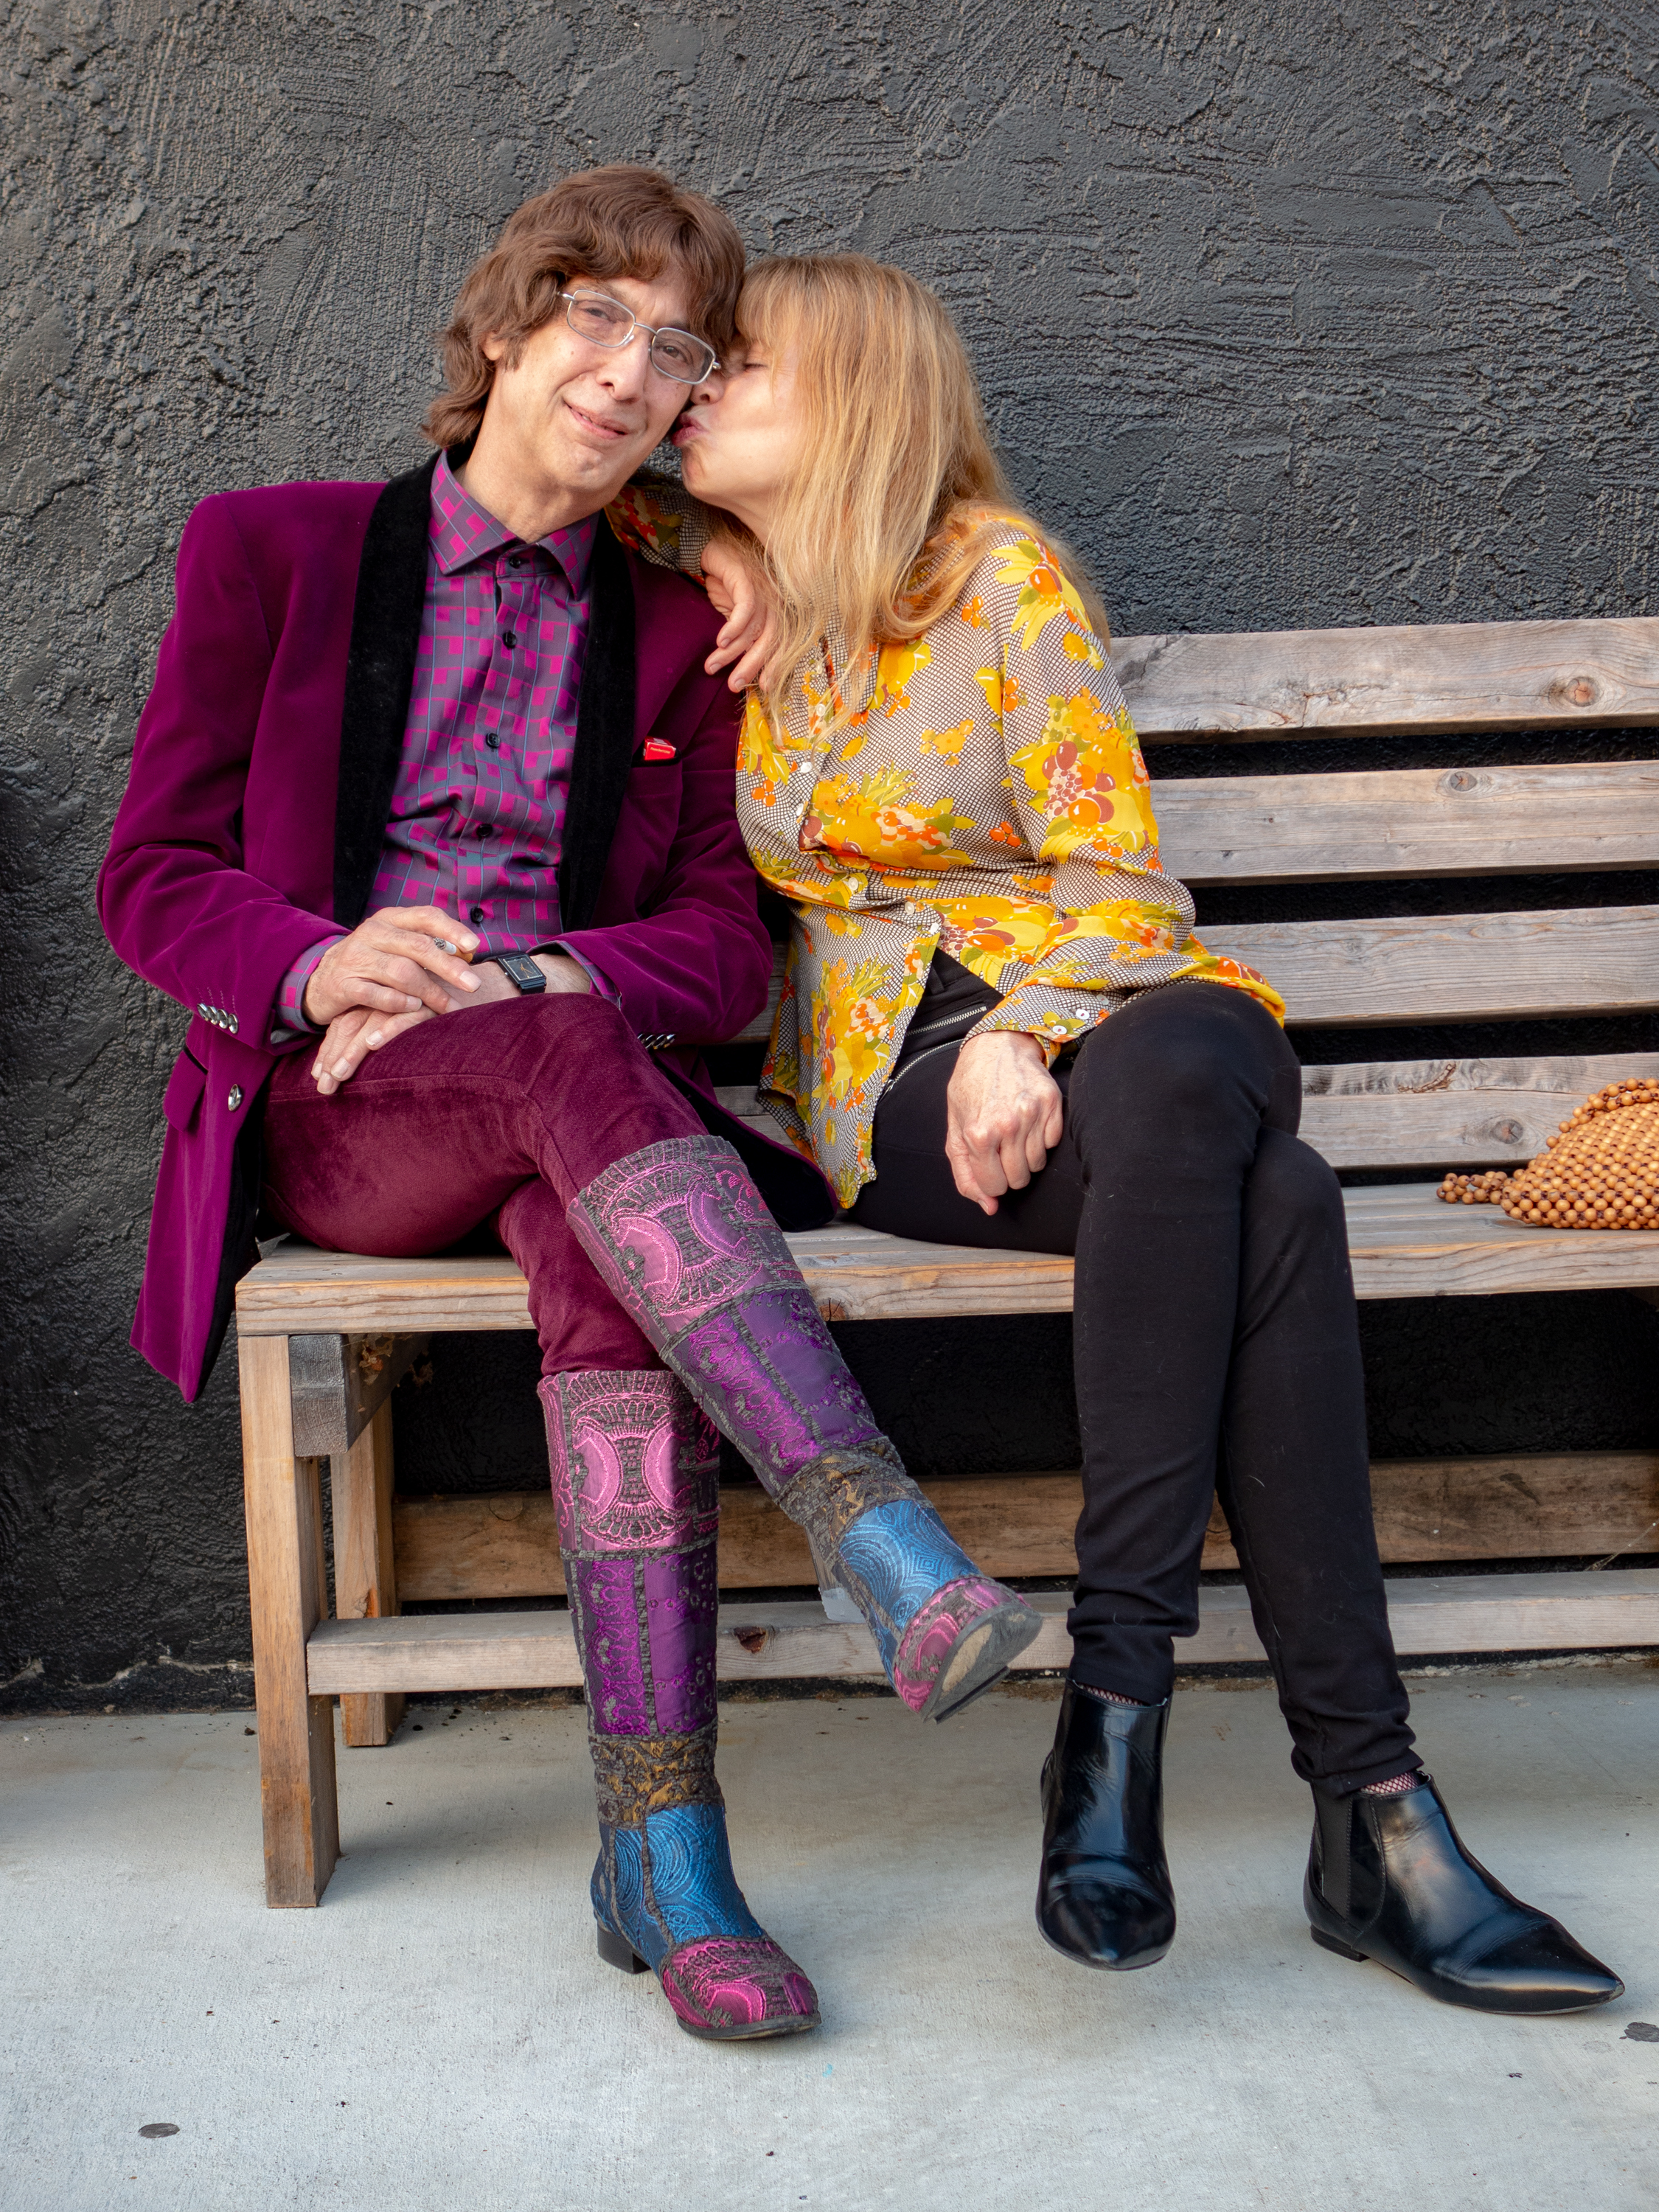 Cyril Jordan and Marcia Doran at the Castelli Art Space in Los Angeles, 8/2018